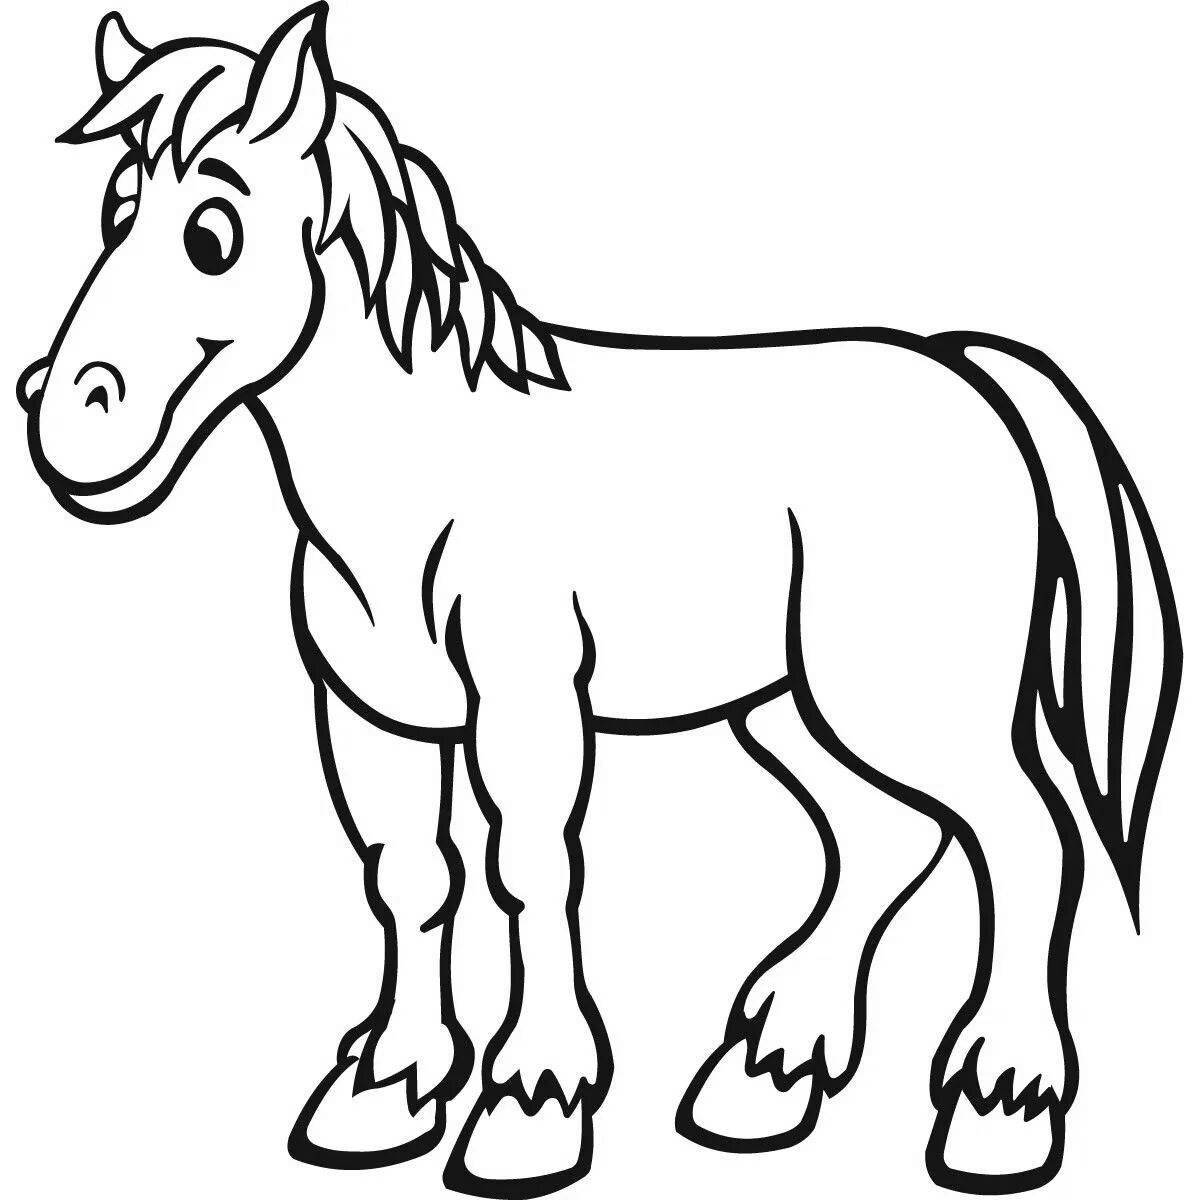 Adorable horse coloring book for 3-4 year olds